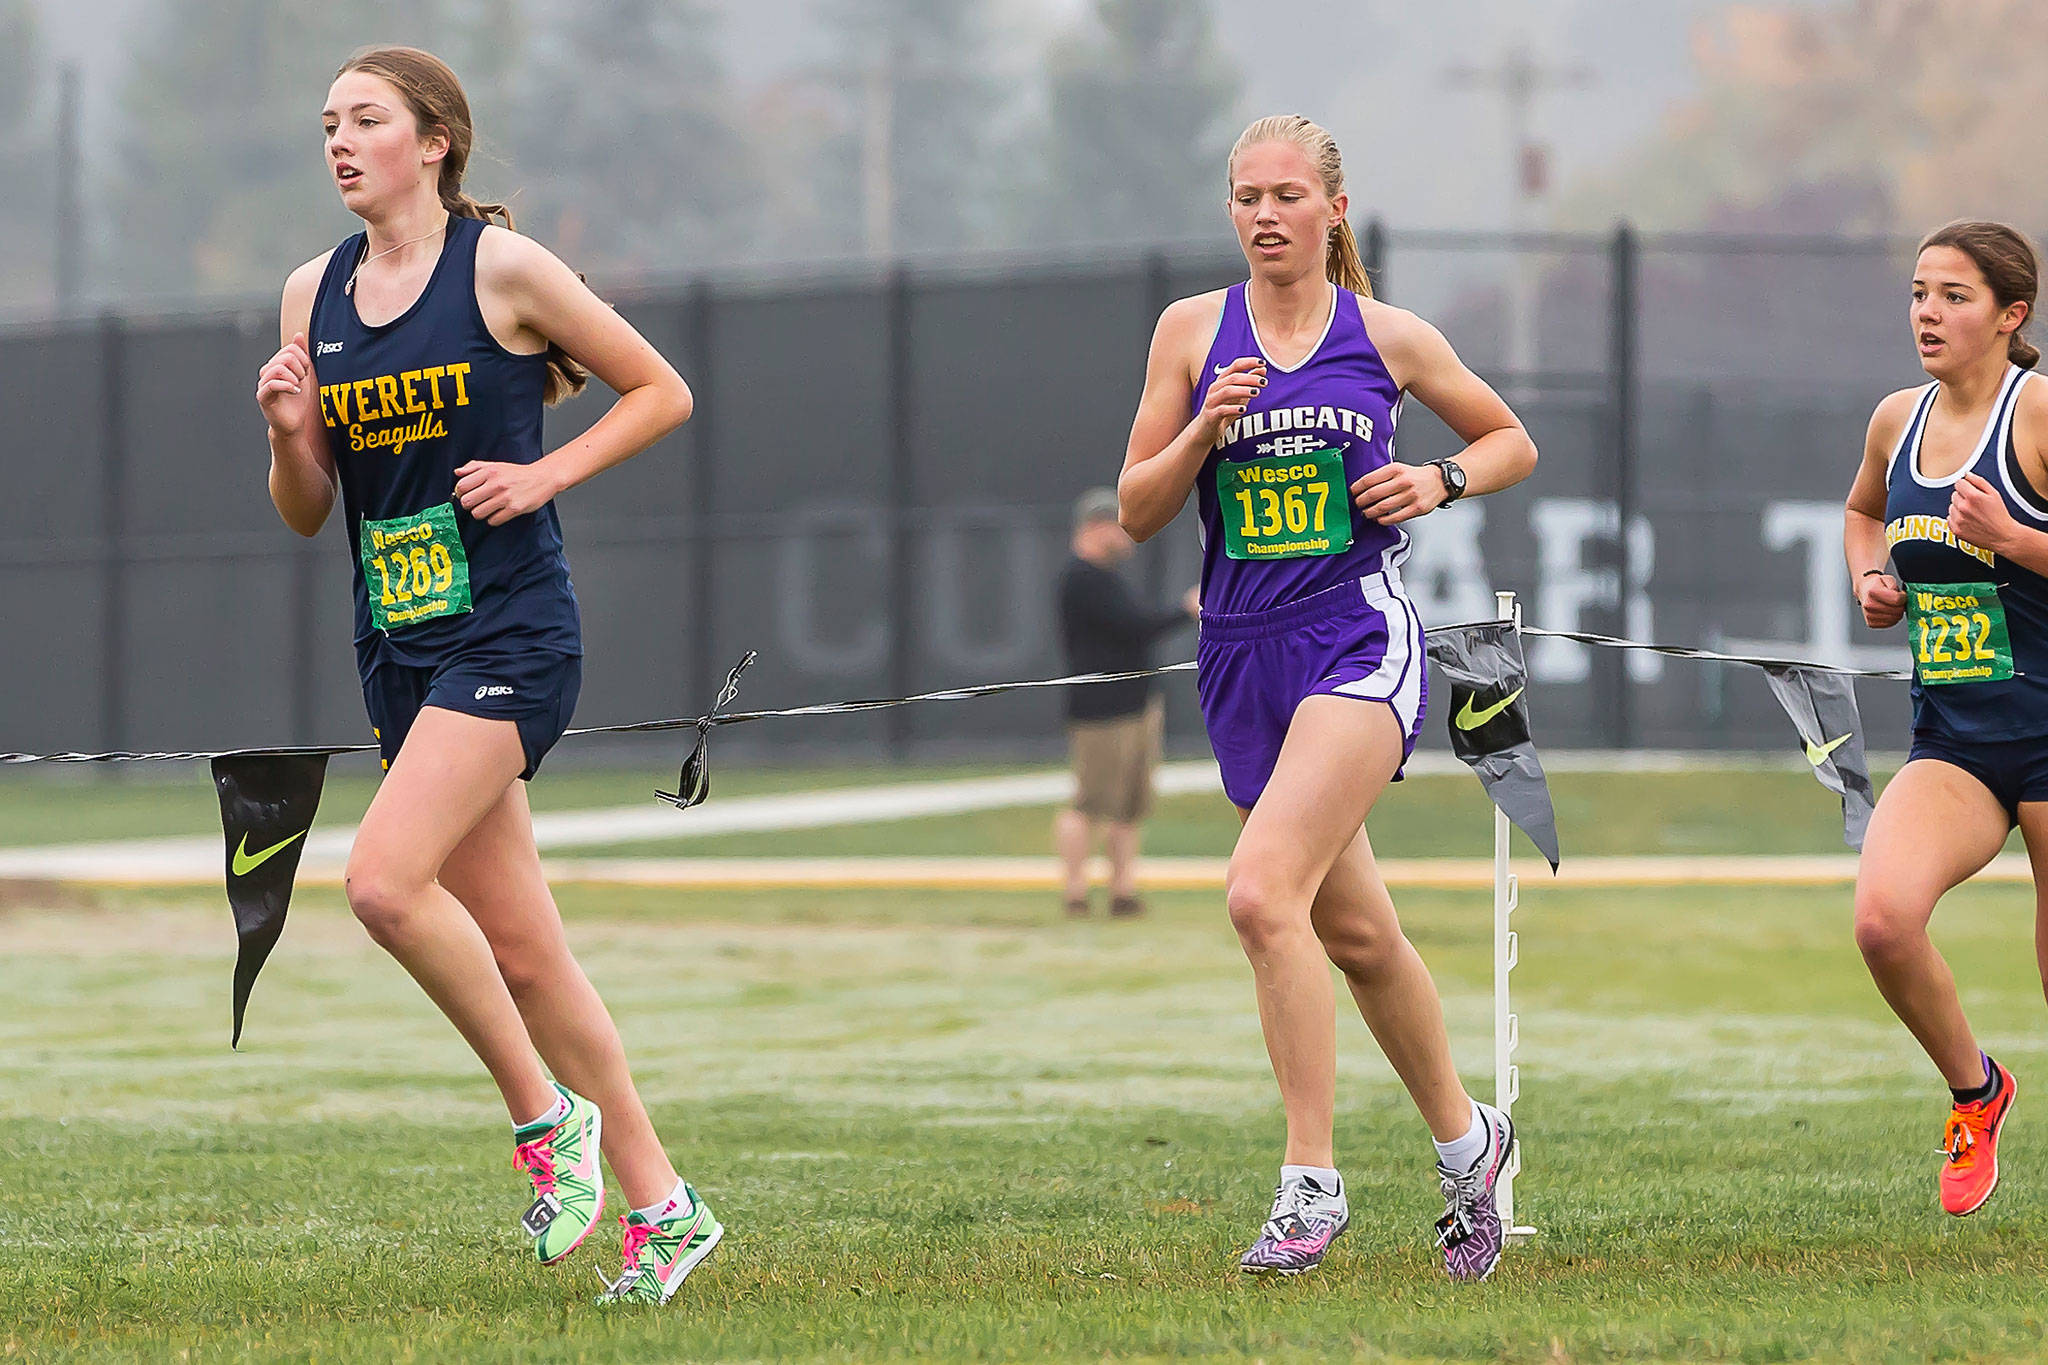 Oak Harbor’s Natalie French, center, competes in the Western Confernce Championships in Lakewood.(Photo by John Fisken)